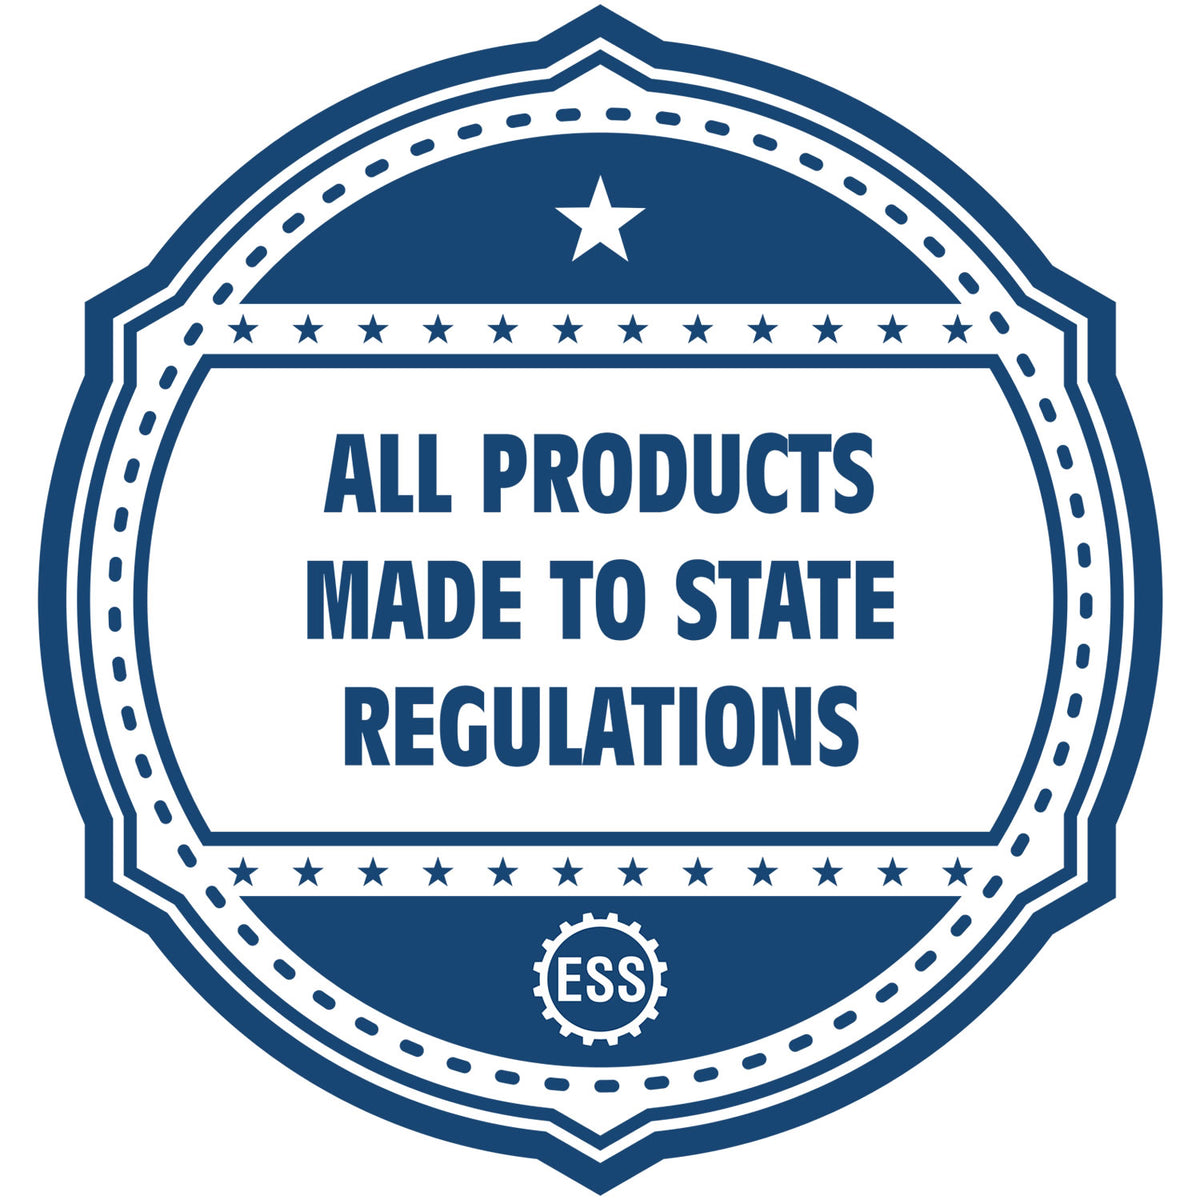 A blue icon or badge for the New Jersey Professional Geologist Seal Stamp showing that this product is made in compliance with state regulations.